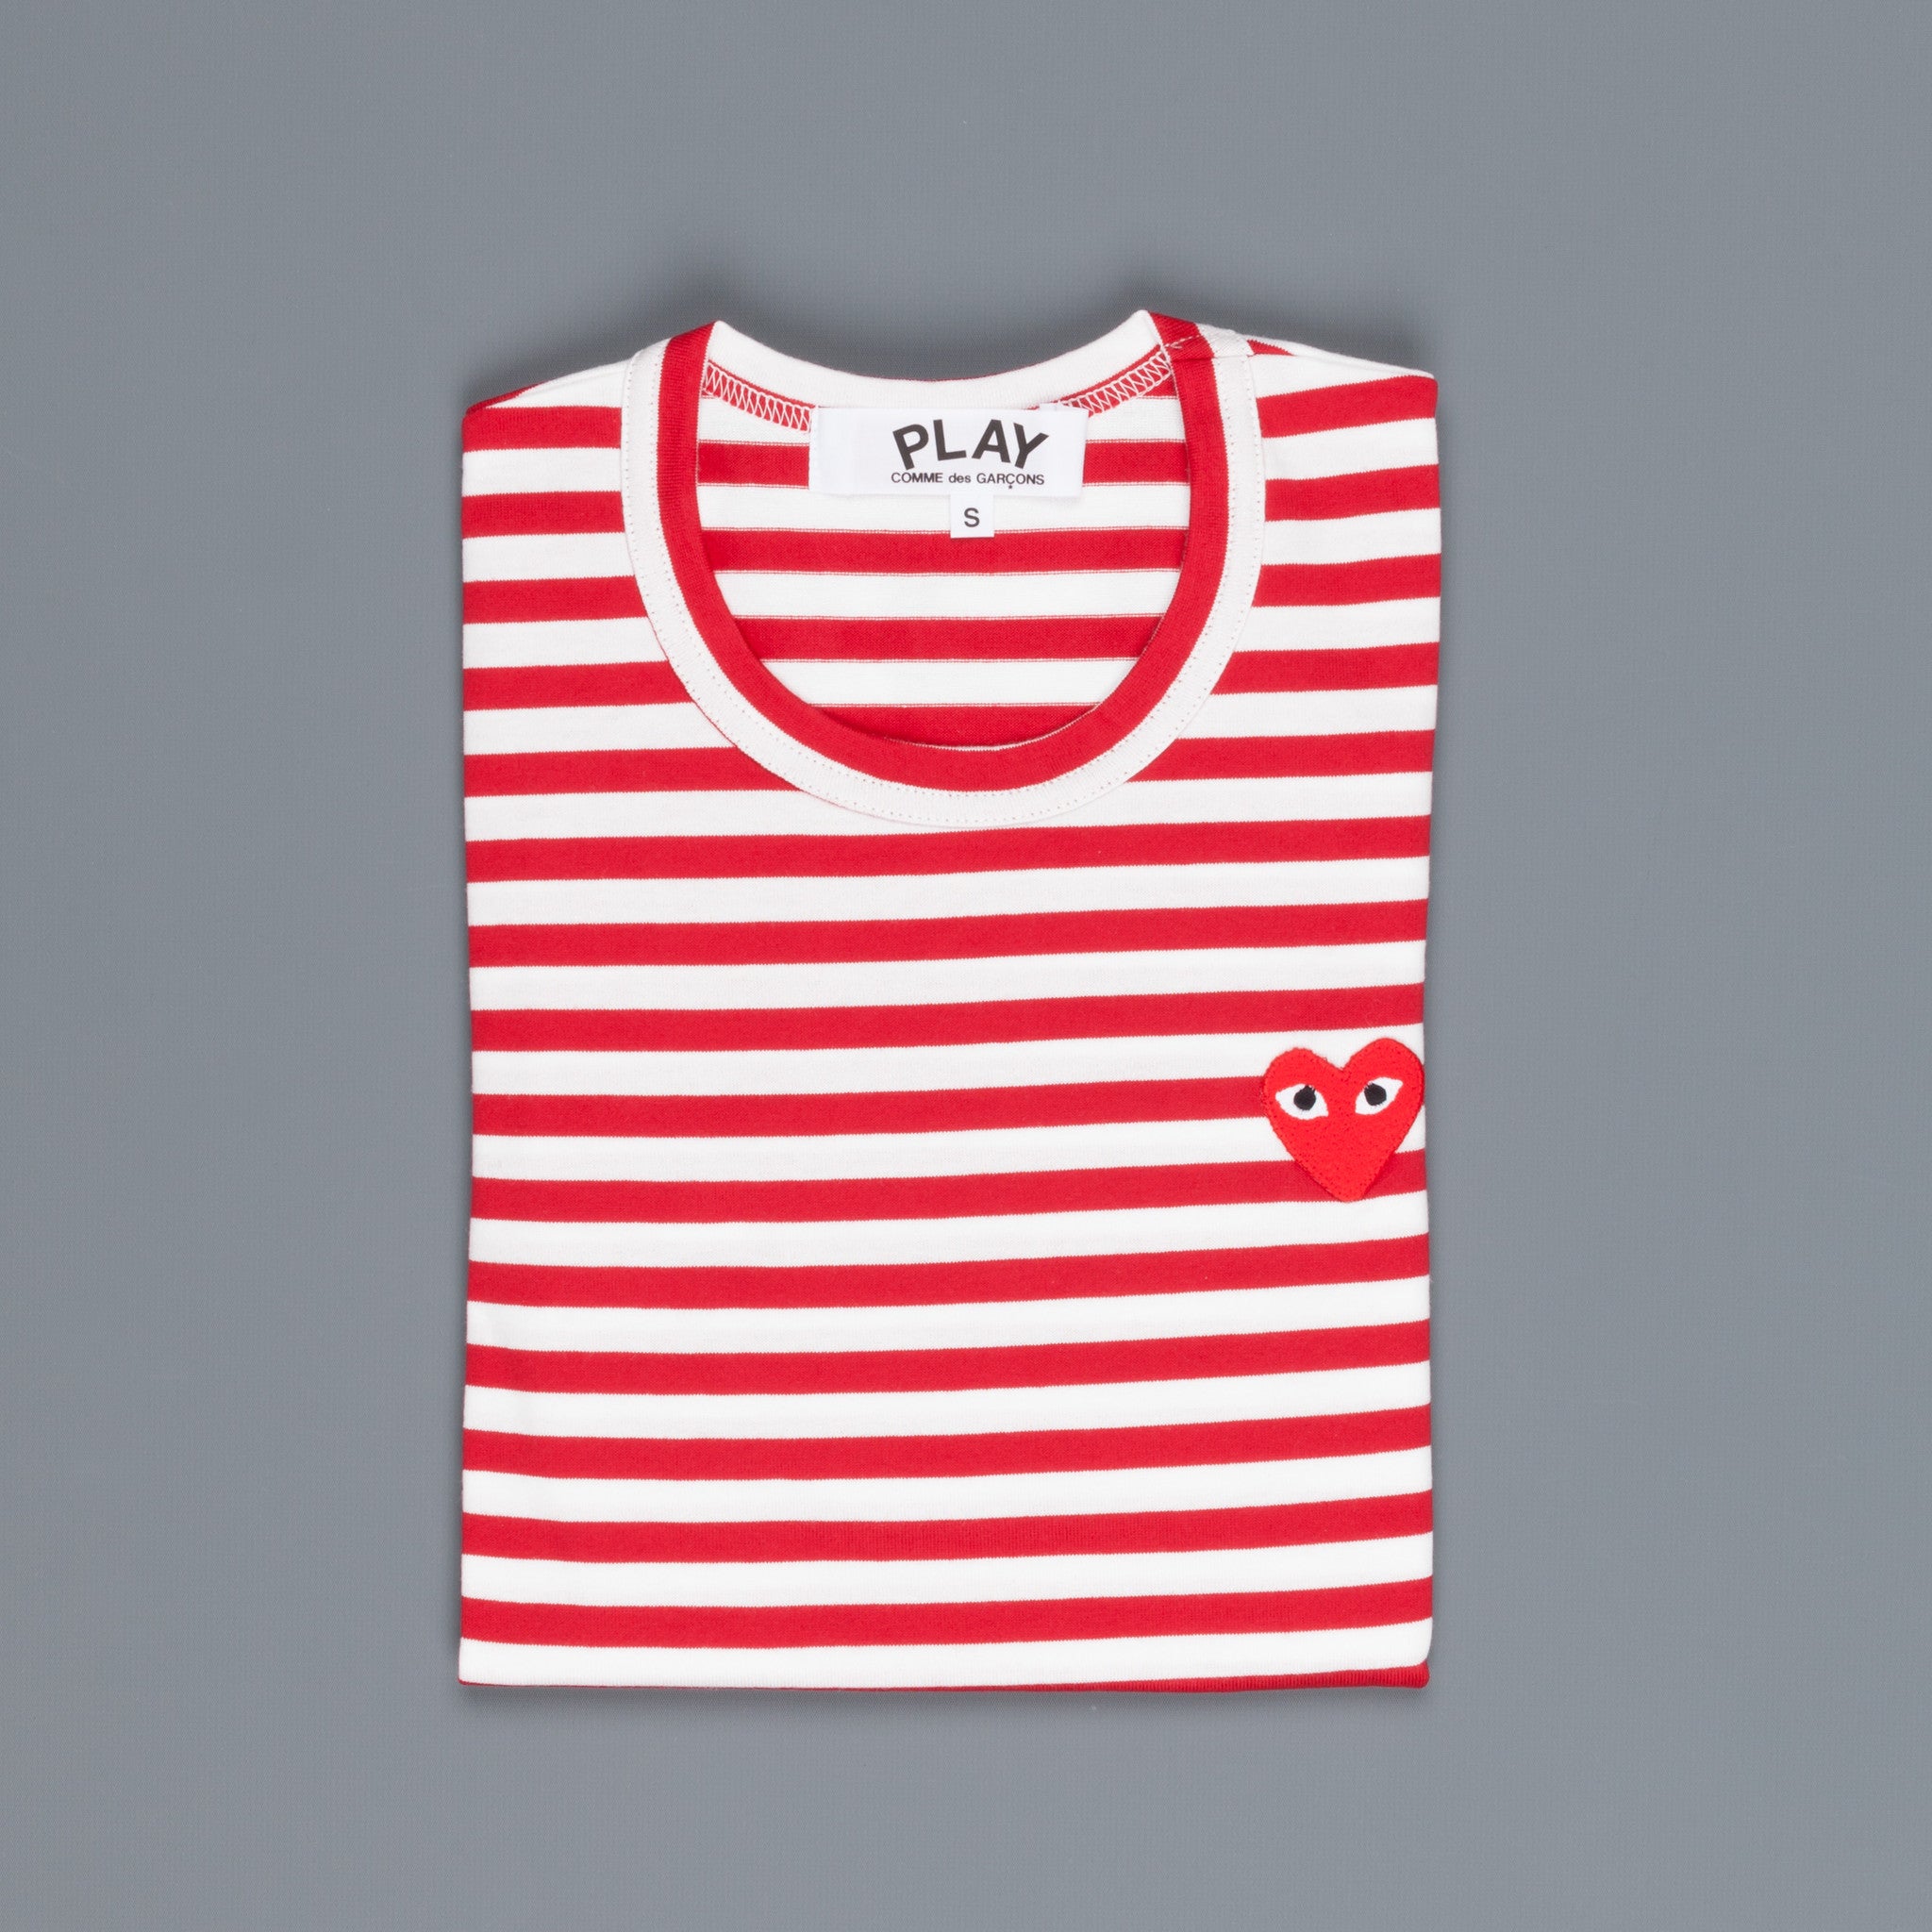 Comme des Garçons PLAY Woman striped tee red heart Red-White